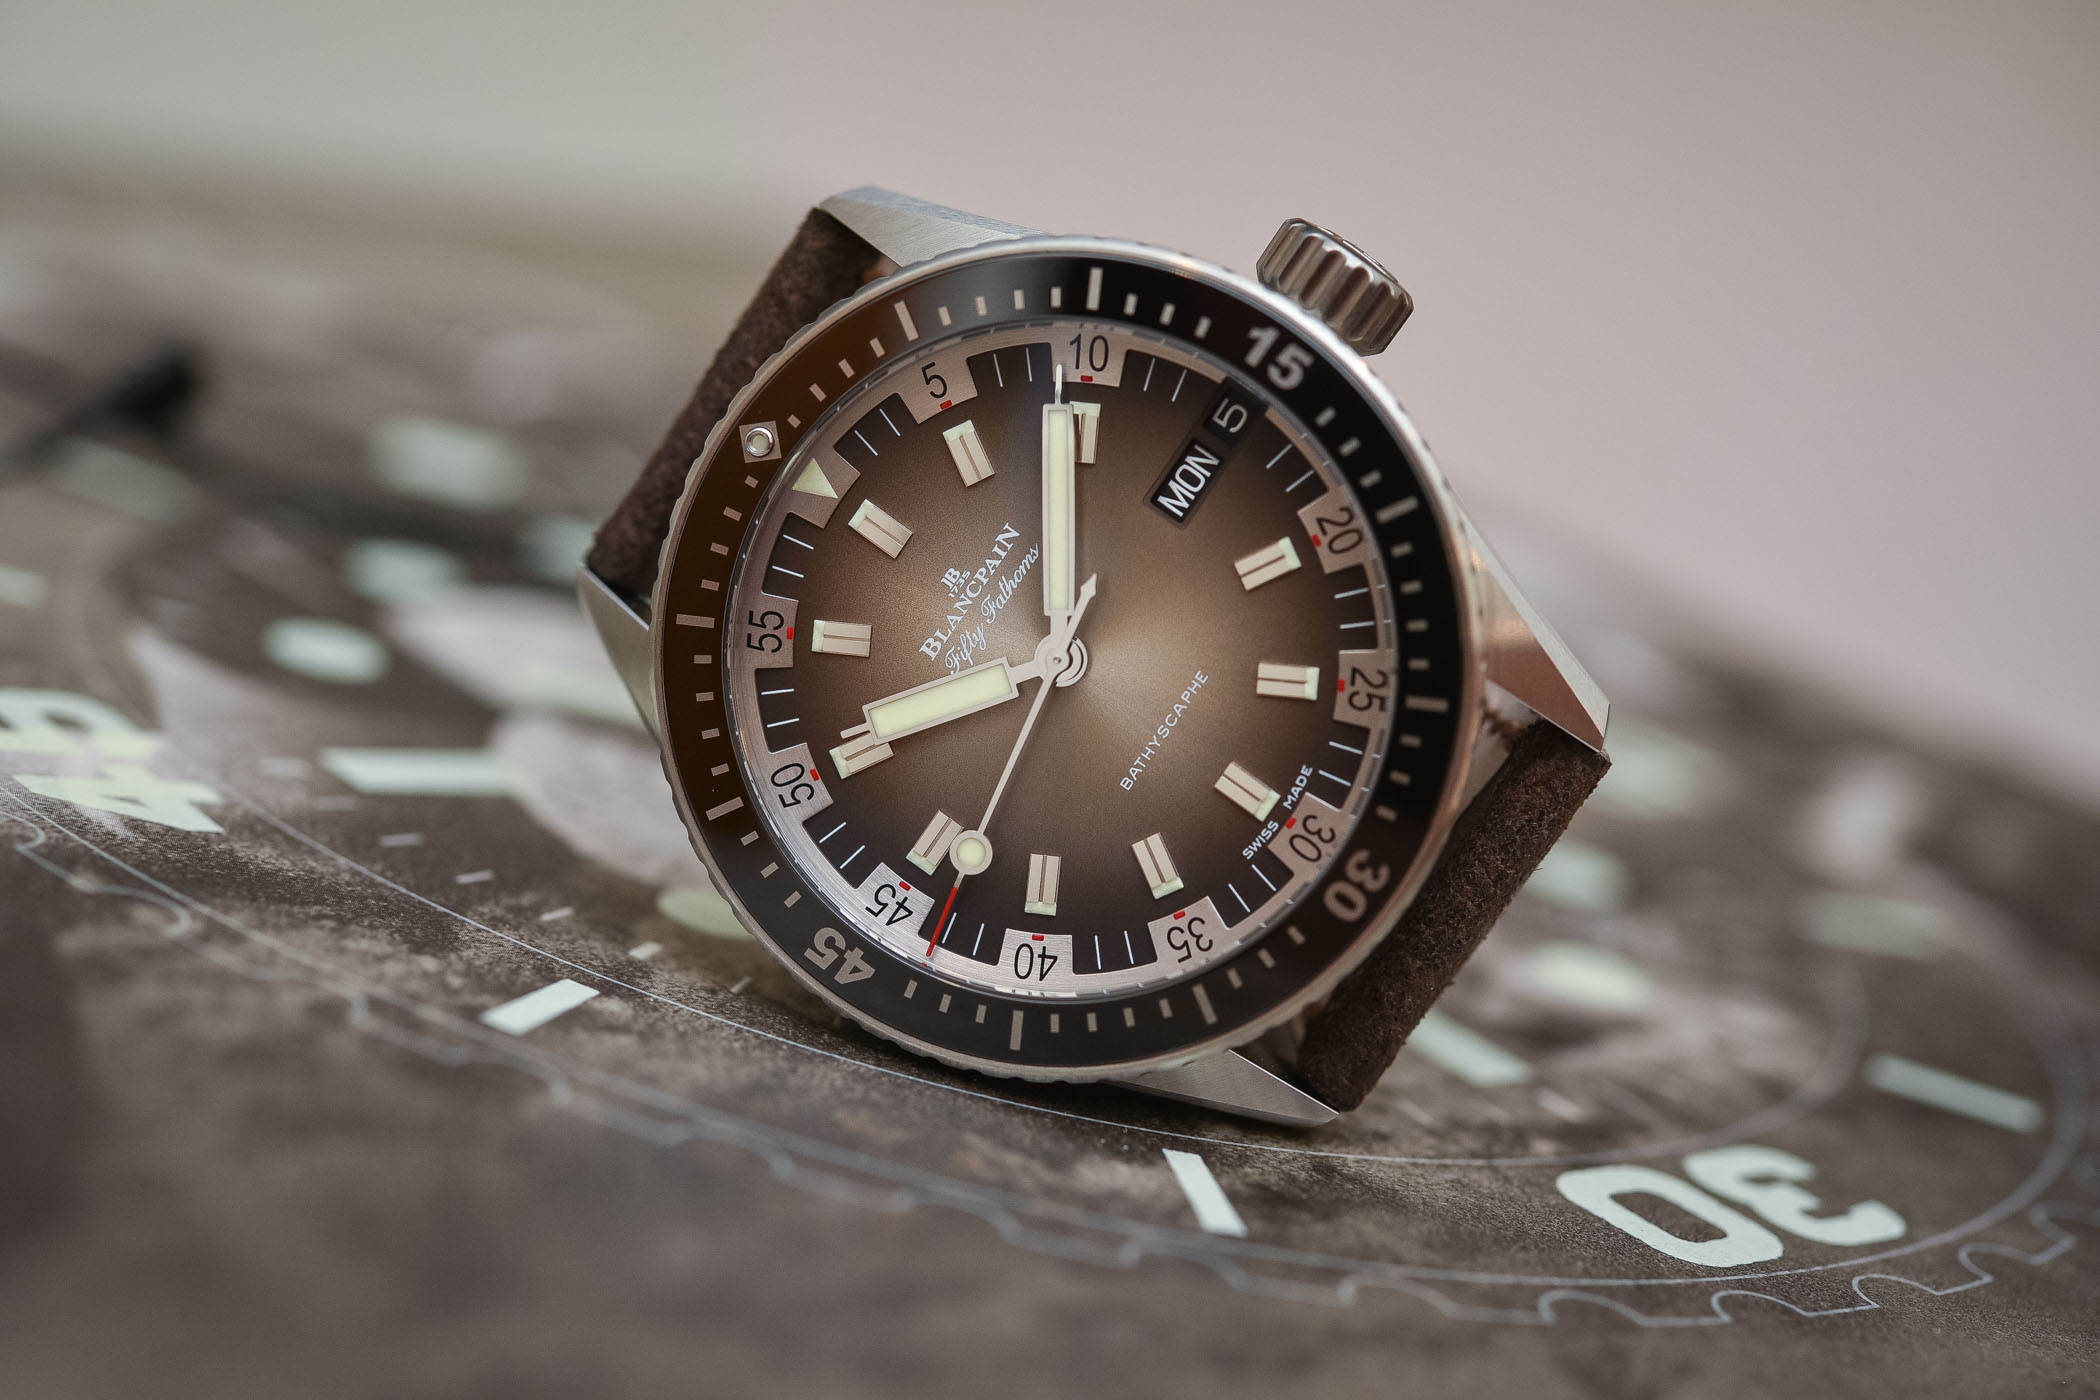 Blancpain-Fifty-Fathoms-Bathyscaphe-Day-Date-70s-baselworld-2018-review-6.jpg